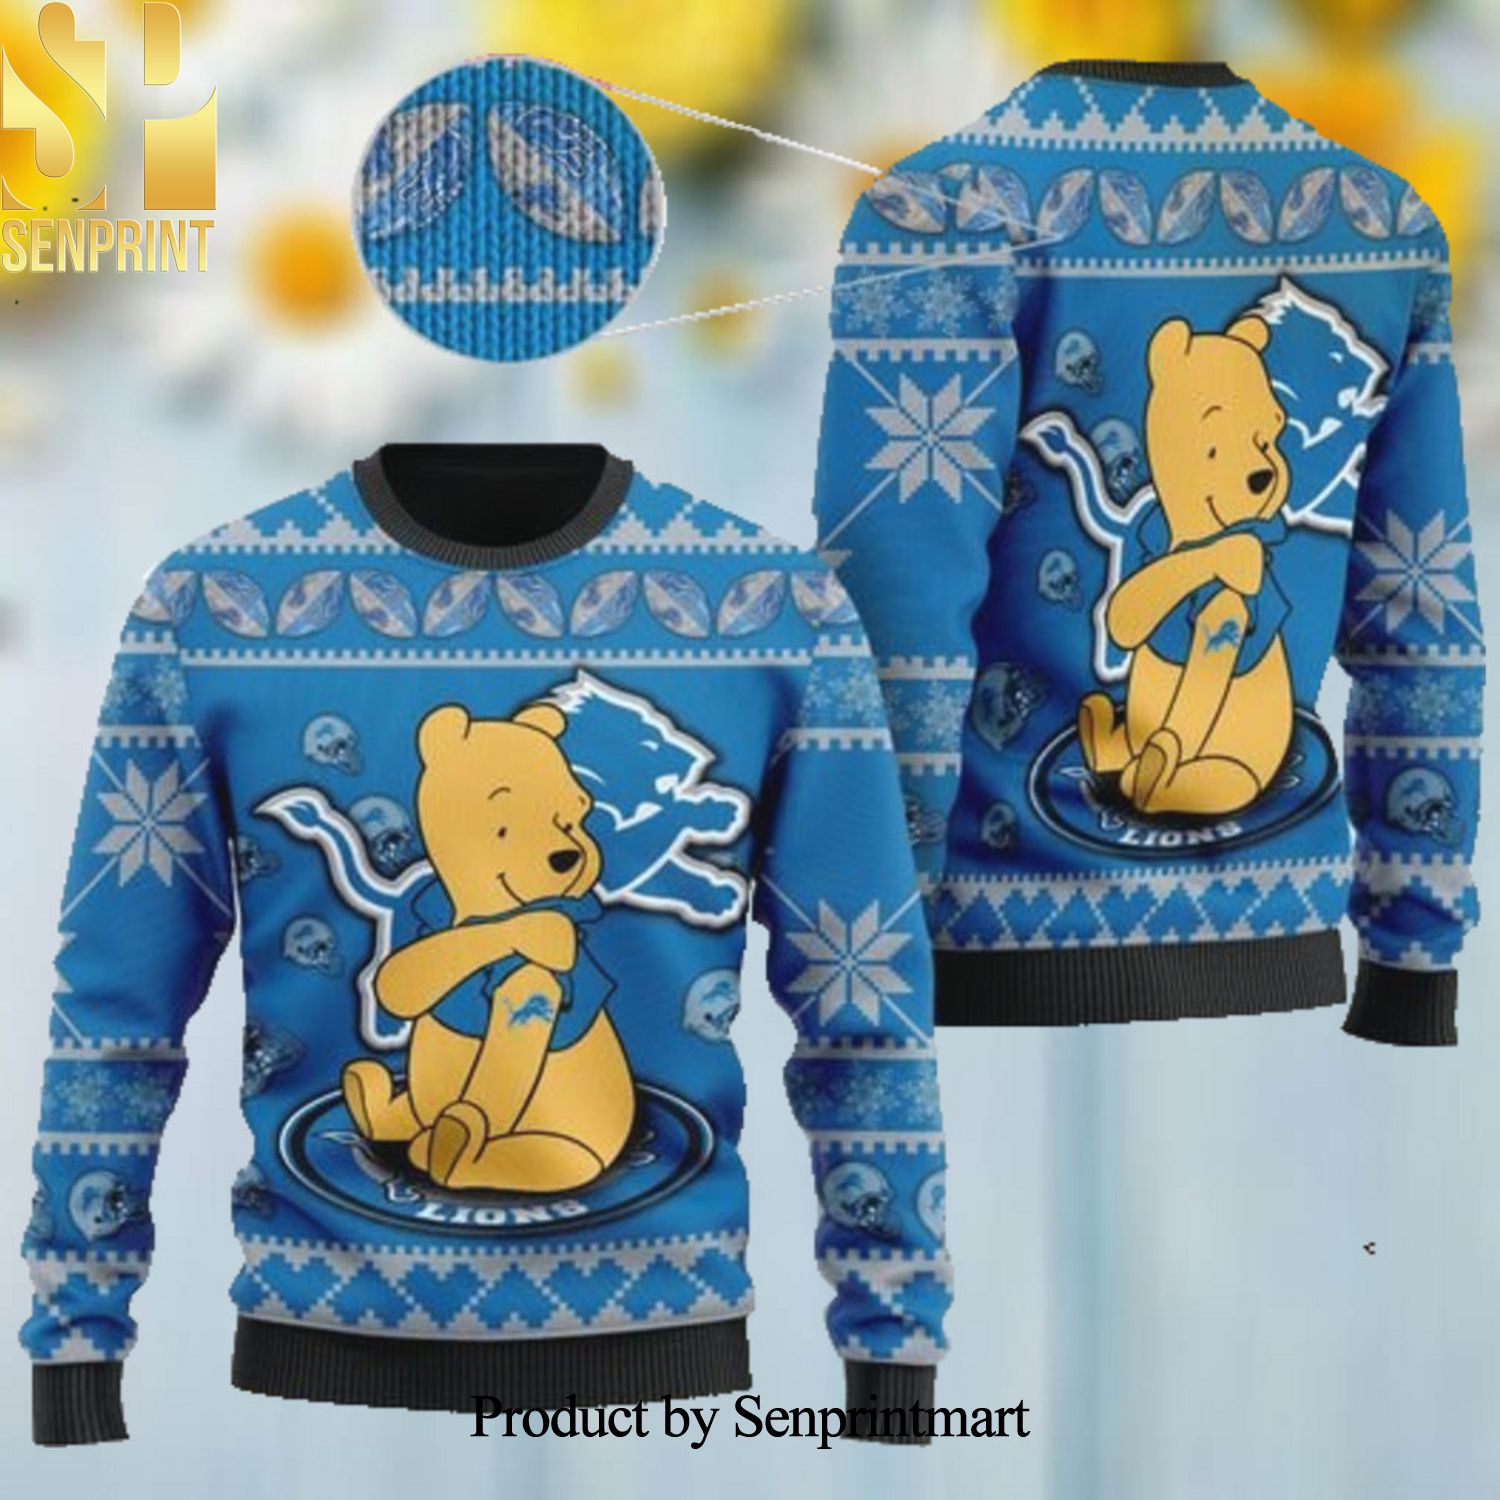 Detroit Lions NFL American Football Team Logo Cute Winnie The Pooh Bear Ugly Christmas Wool Knitted Sweater